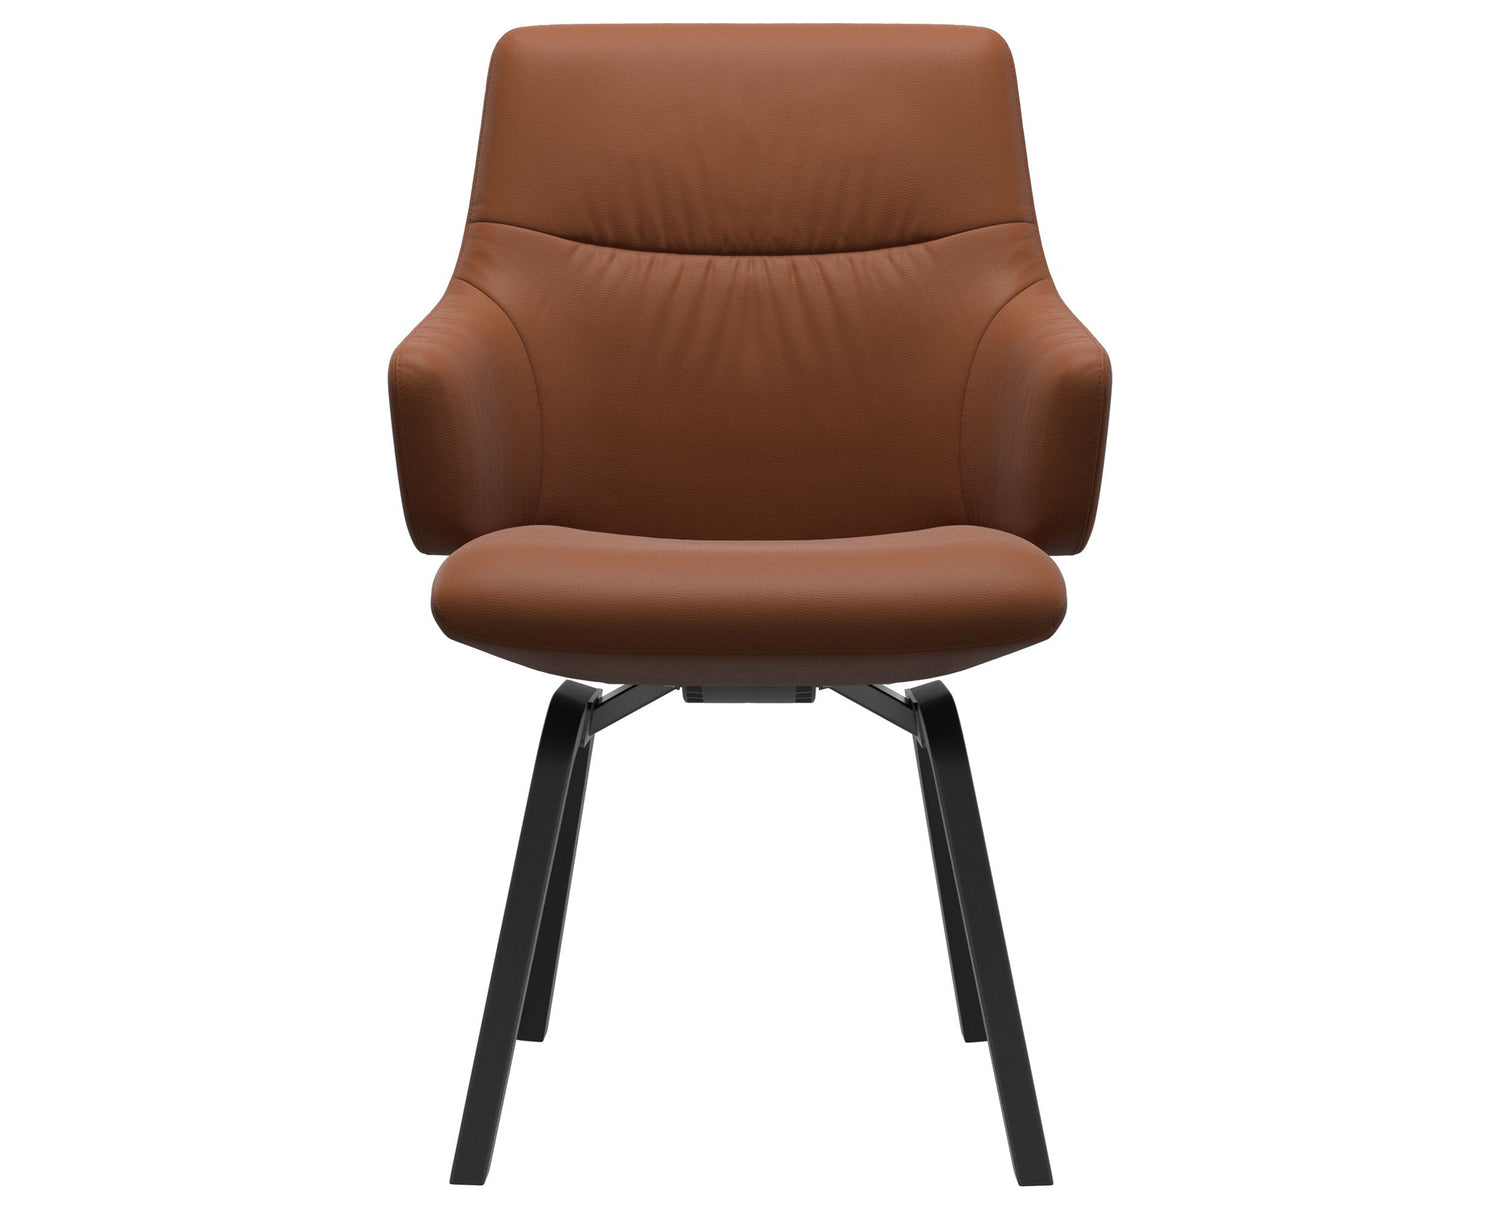 Paloma Leather New Cognac & Black Base | Stressless Mint Low Back D200 Dining Chair w/Arms | Valley Ridge Furniture